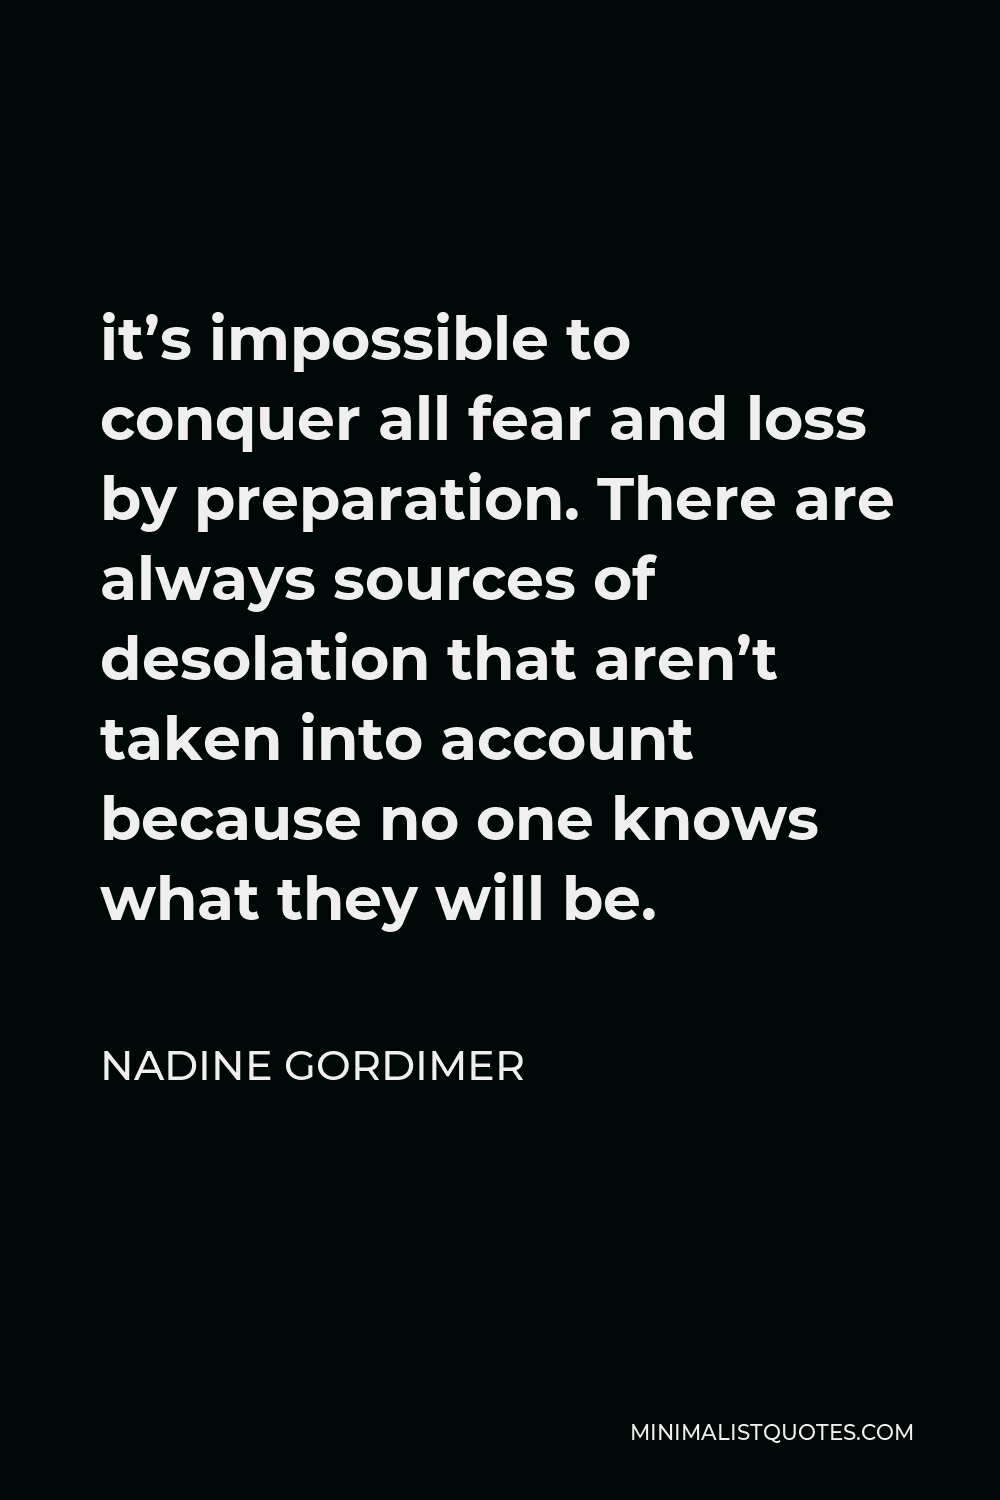 Nadine Gordimer Quote - it’s impossible to conquer all fear and loss by preparation. There are always sources of desolation that aren’t taken into account because no one knows what they will be.